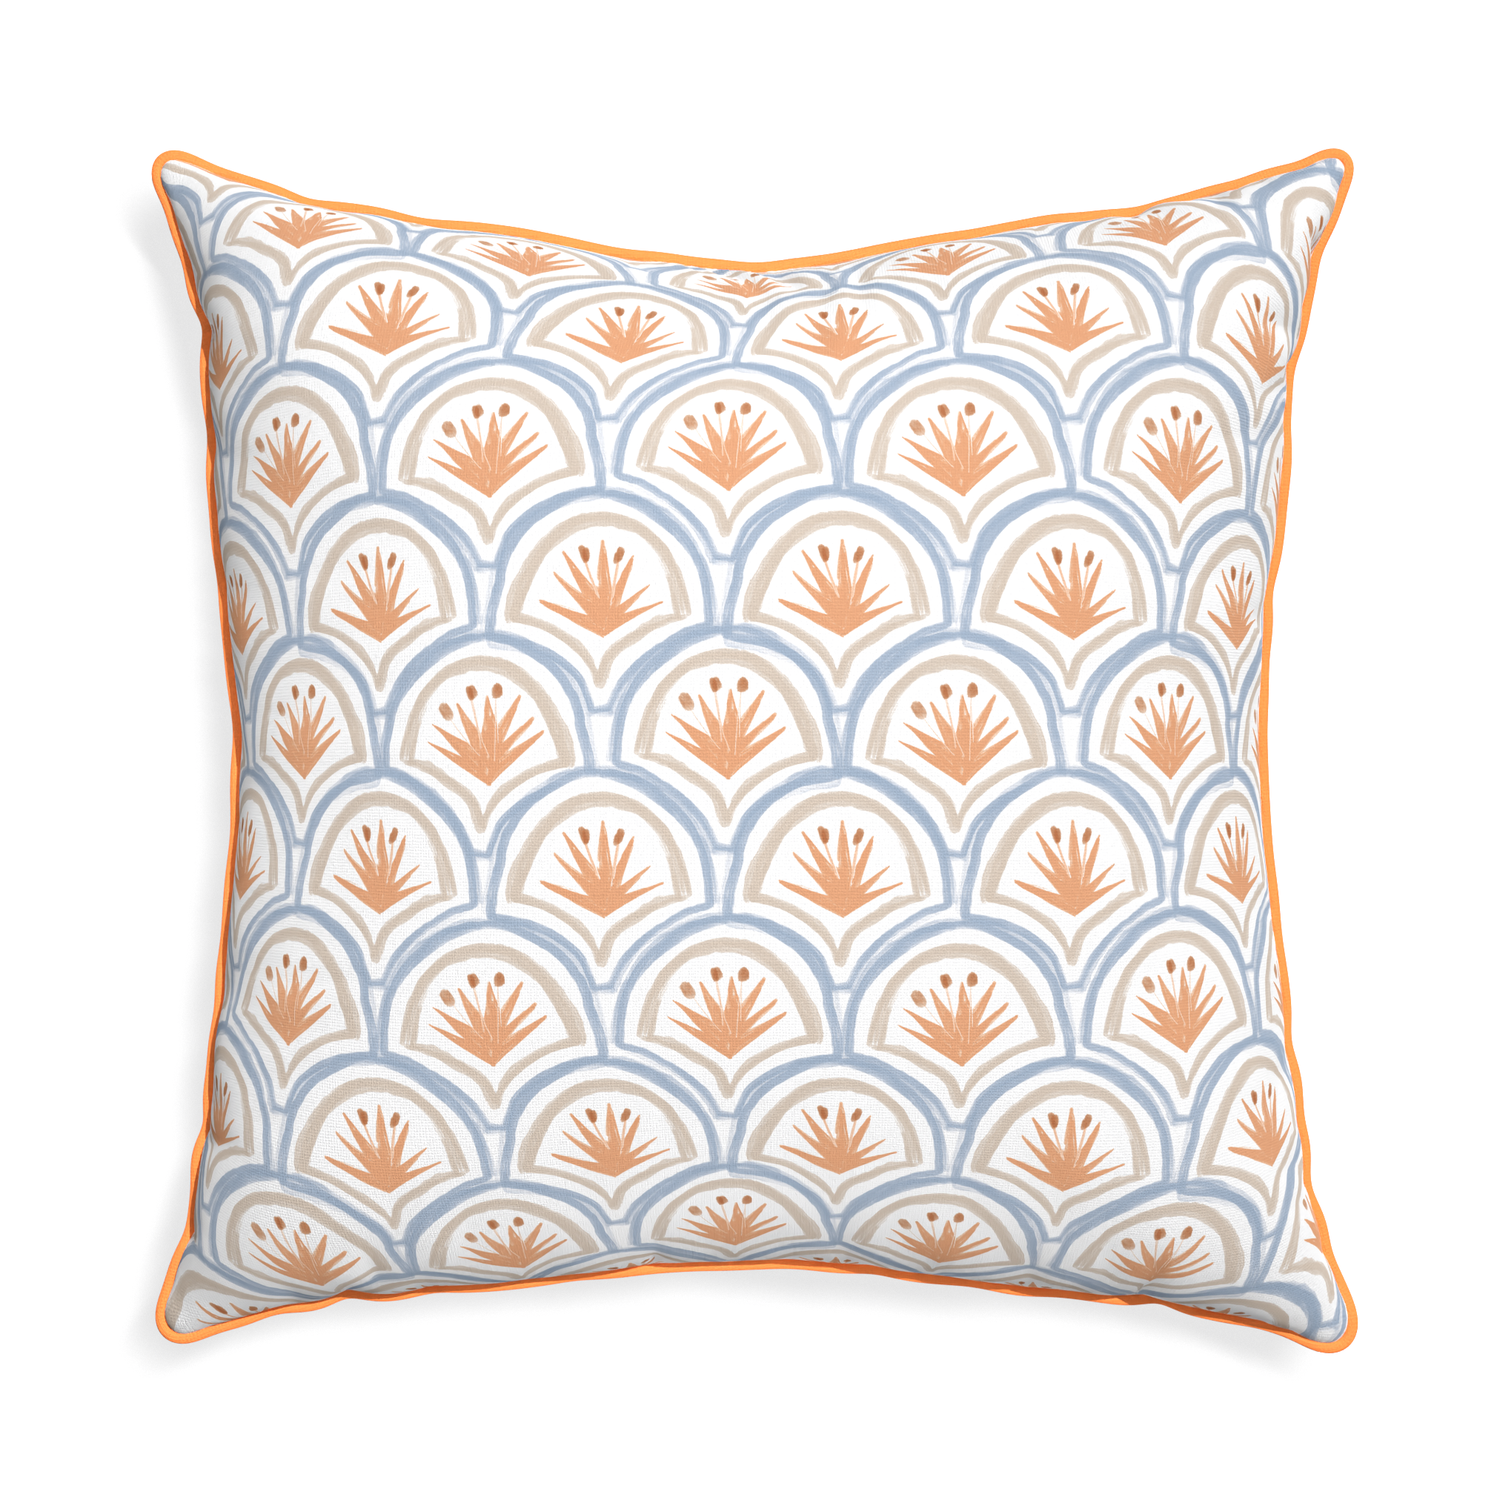 Euro-sham thatcher apricot custom art deco palm patternpillow with clementine piping on white background